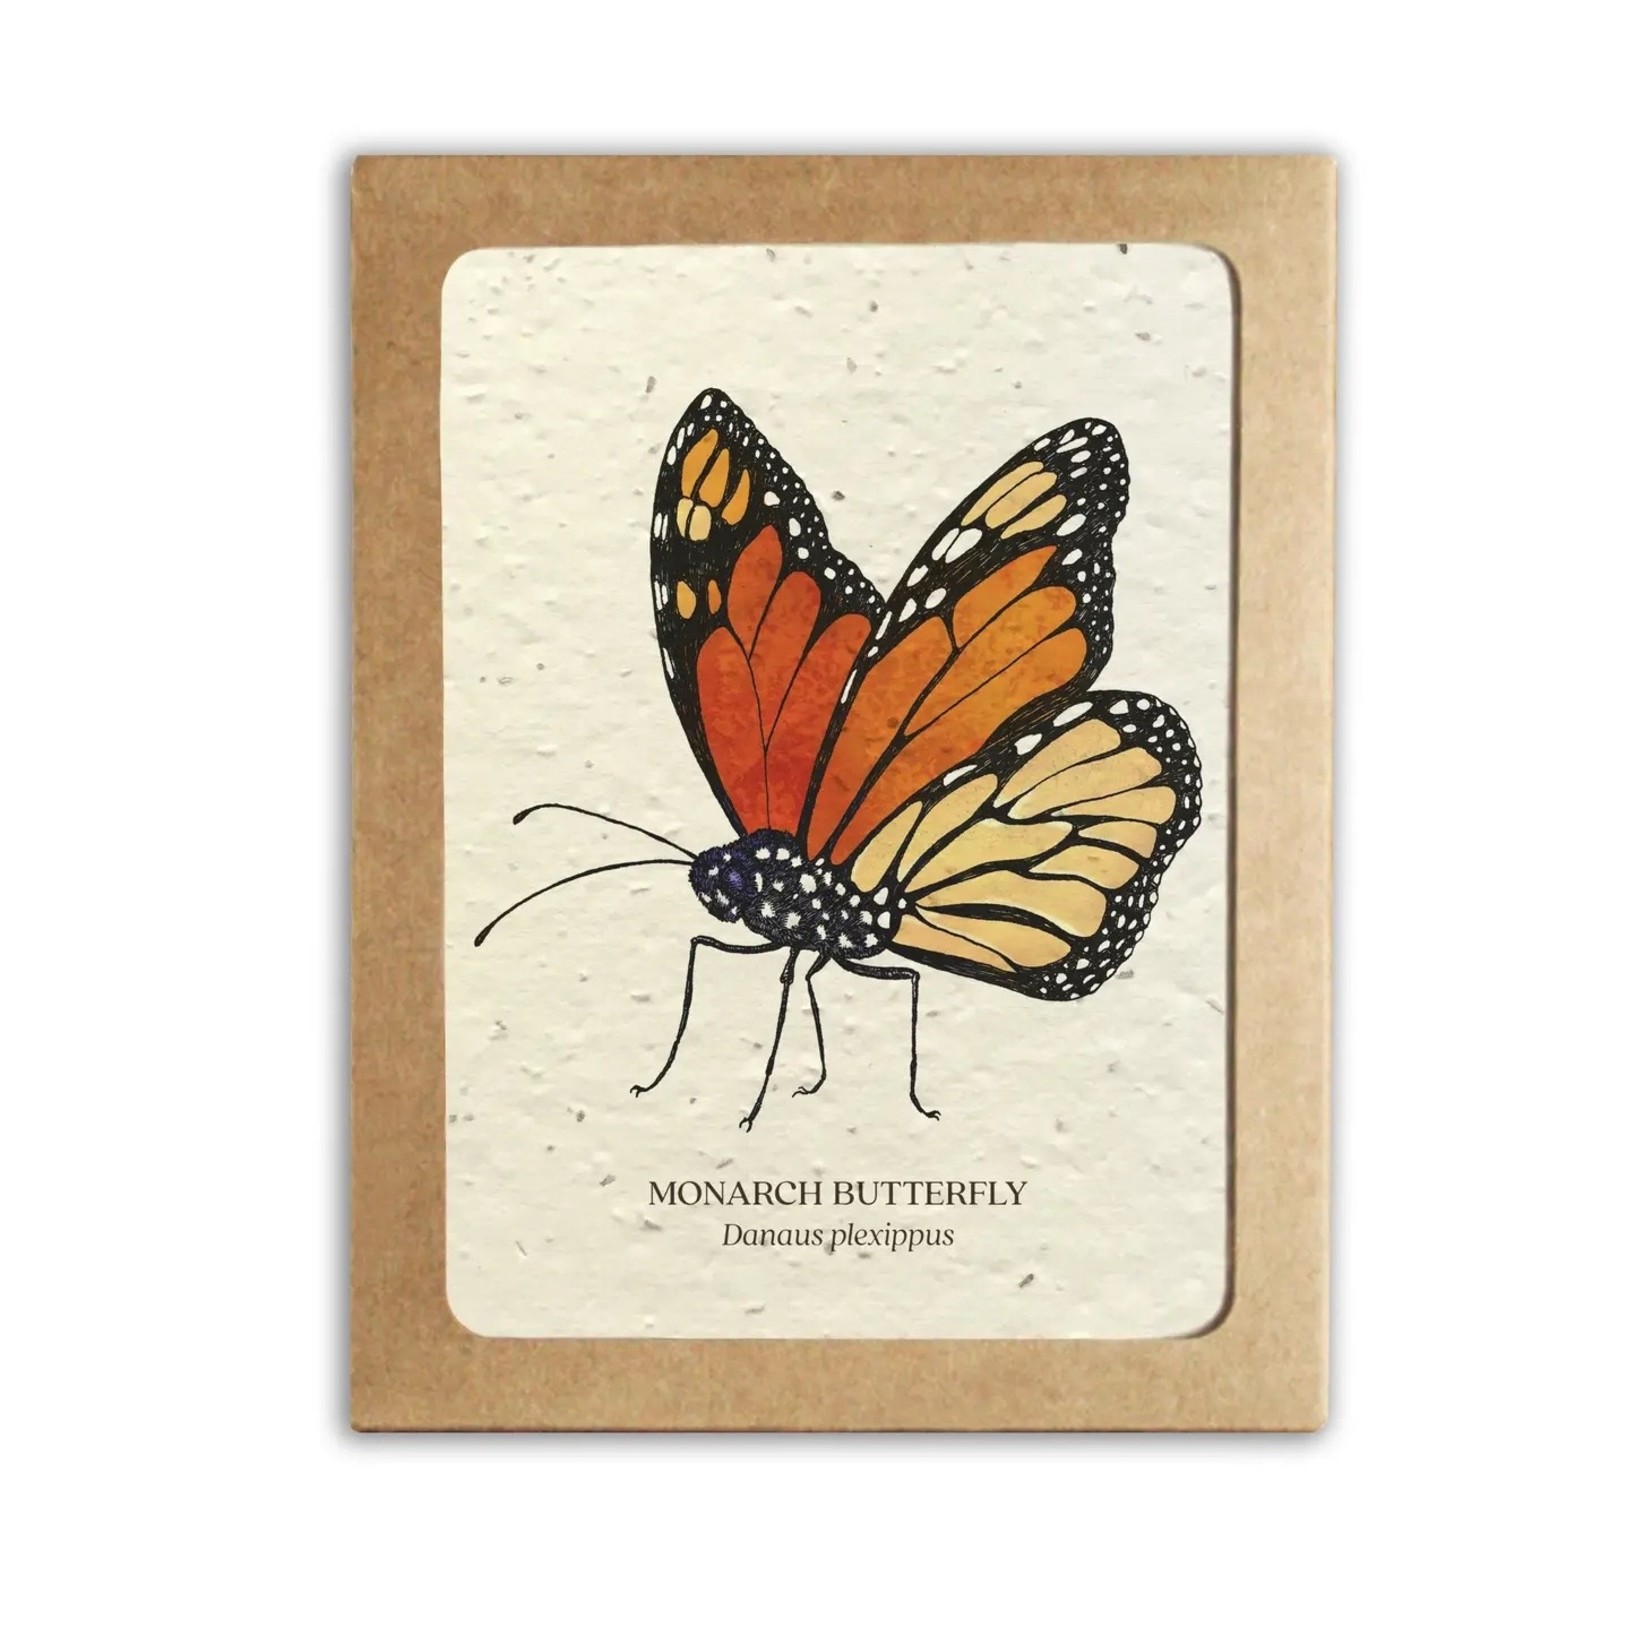 The Bower Studio Plantable Seed Insect Greeting Cards box set